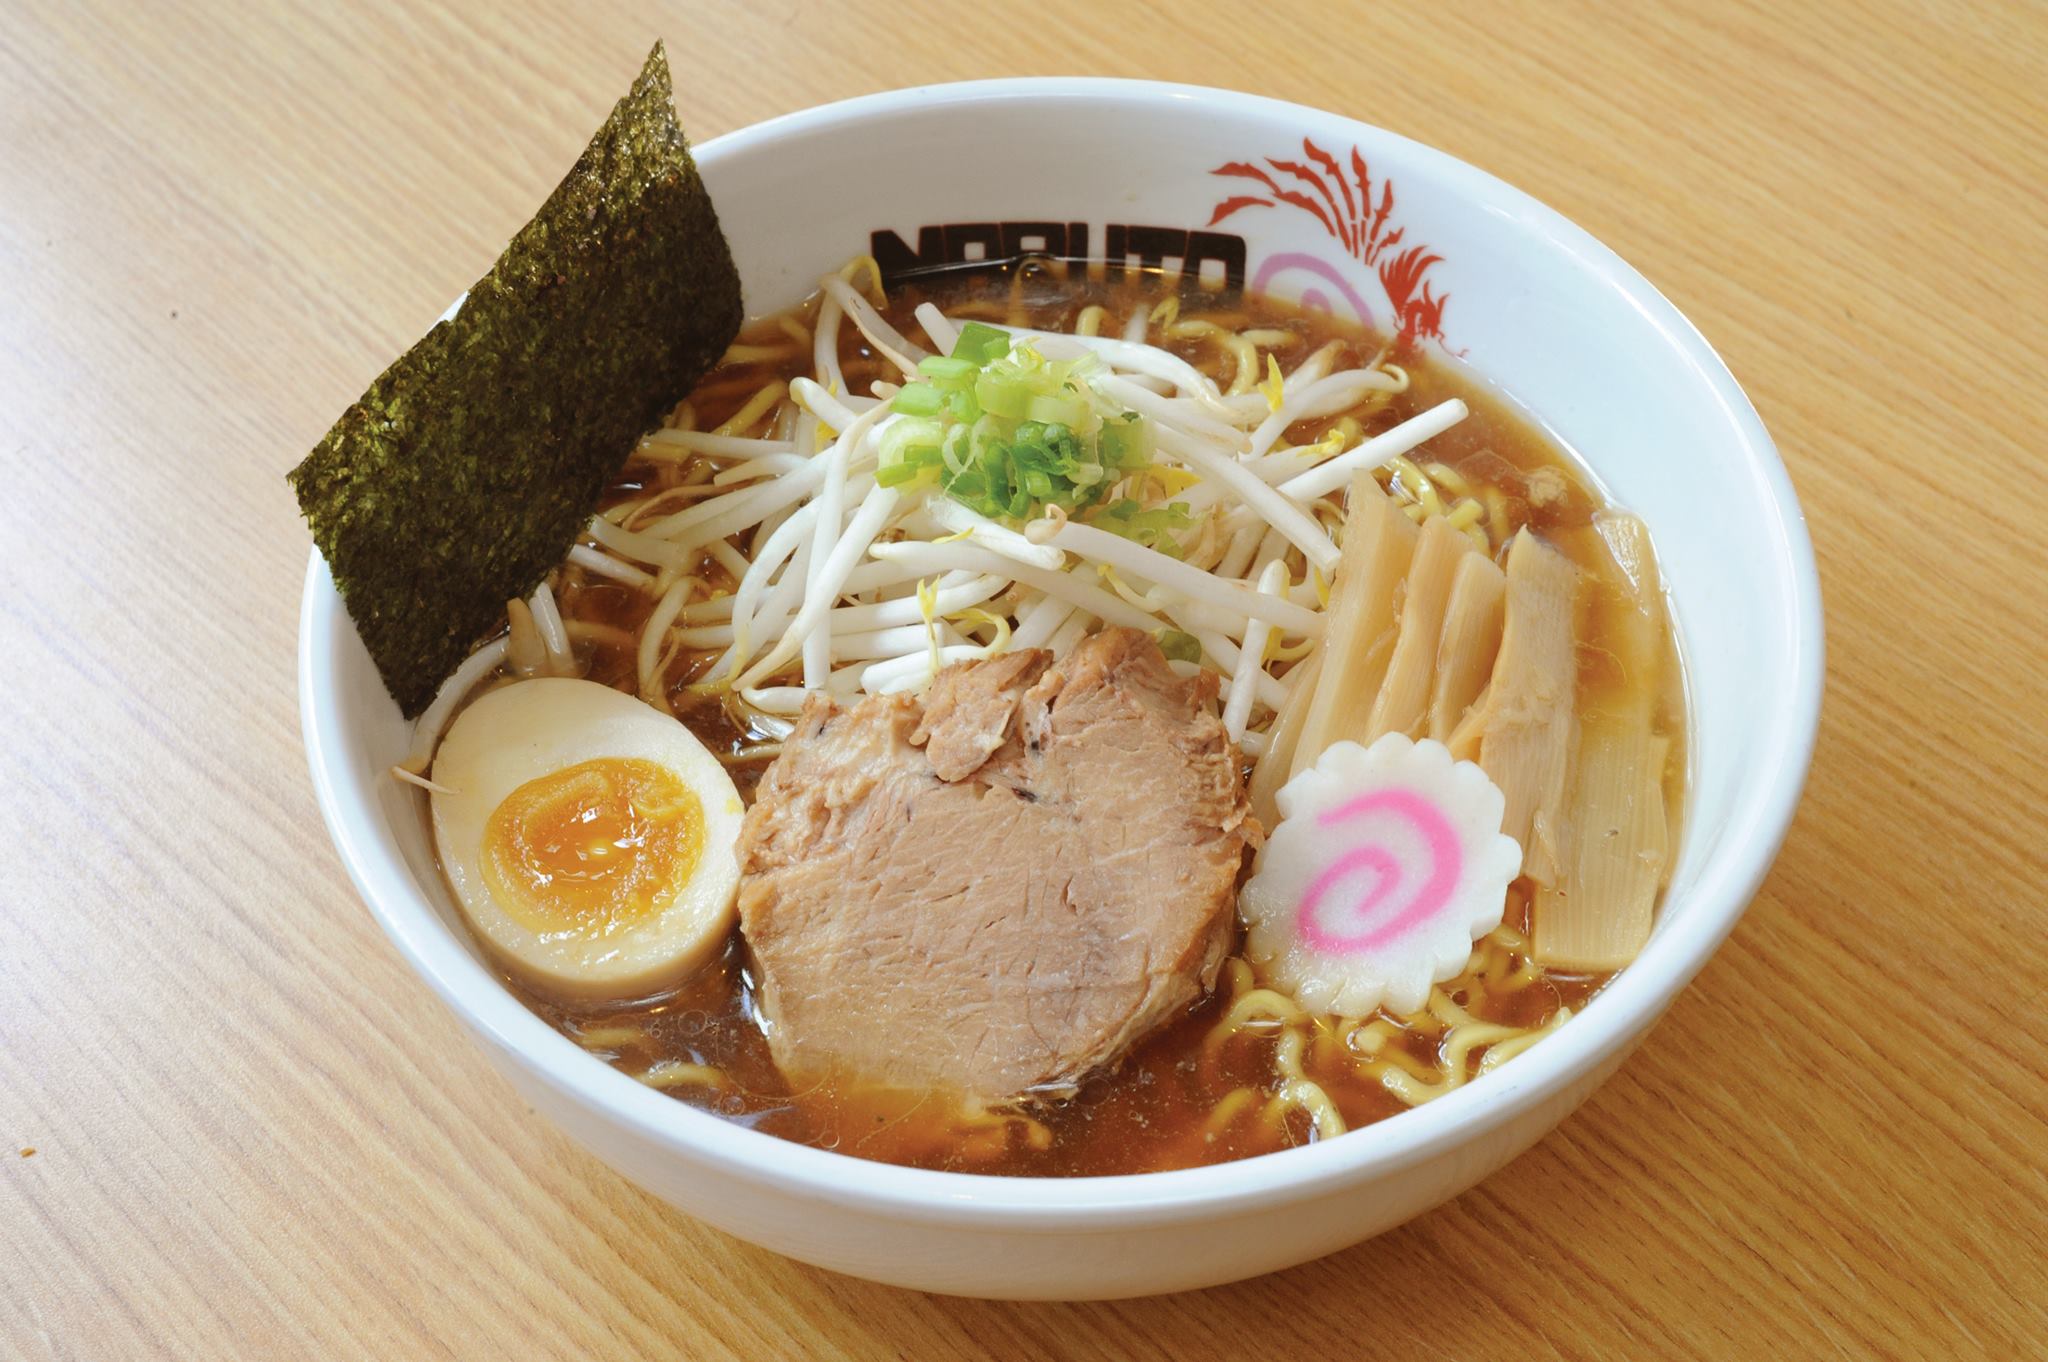 A bowl of ramen with soup, noodles, bean rpouts, greens, a slice of pork, a half-sliced hard-boiled egg, a fish cake with a pink swirl, and a slice of seaweed